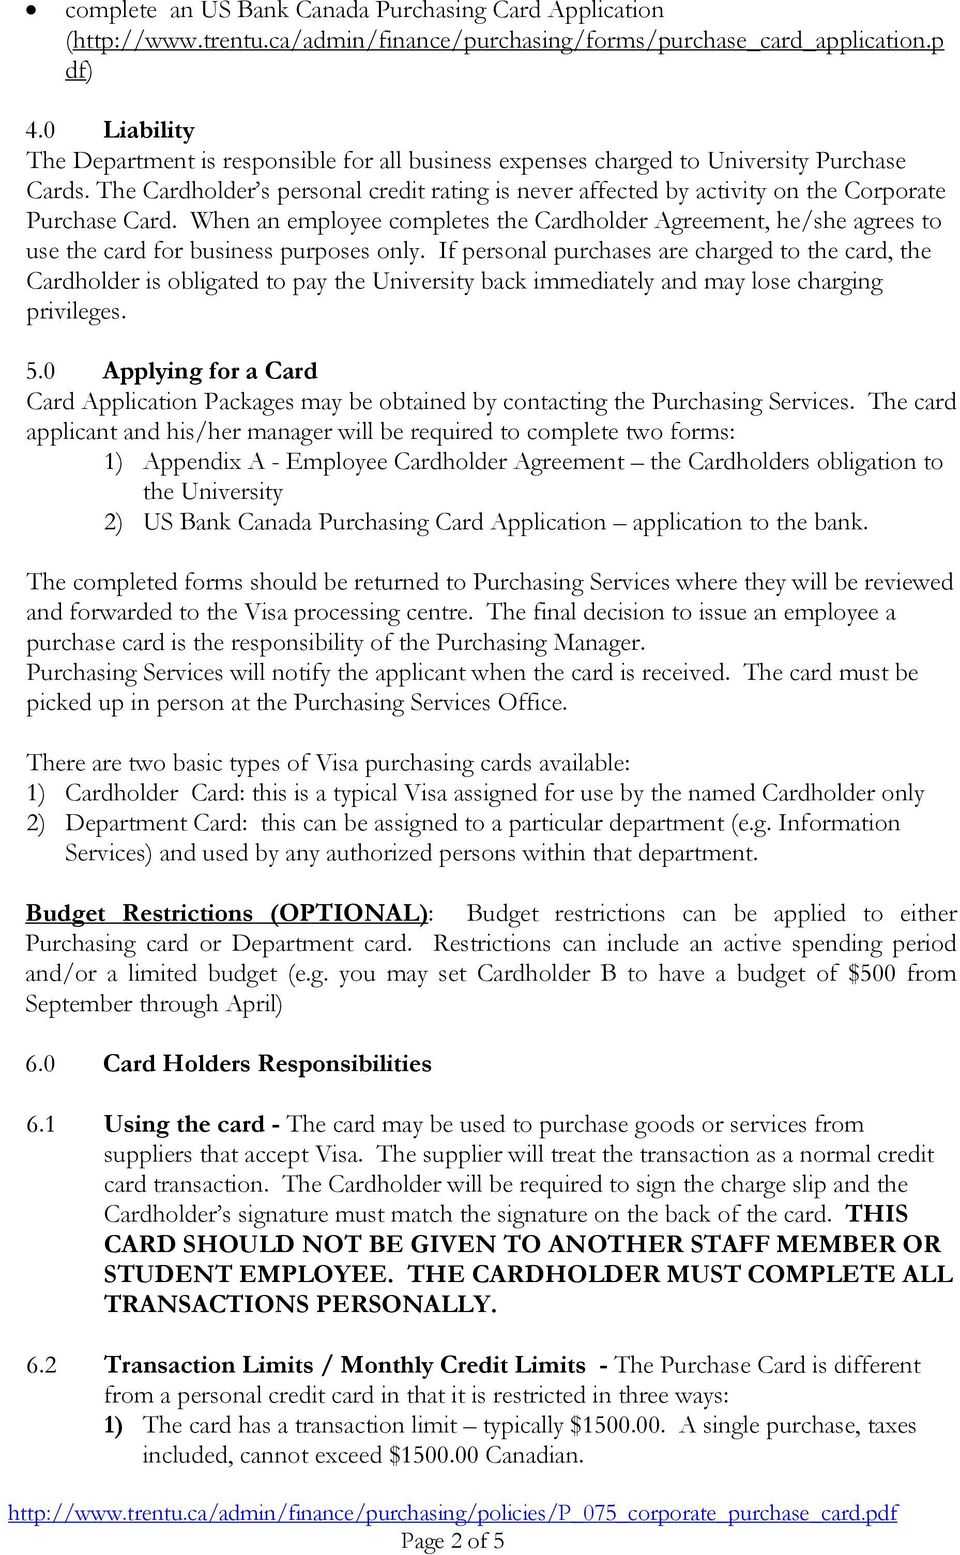 Corporate Purchase Pur – Pdf Free Download In Corporate Credit Card Agreement Template